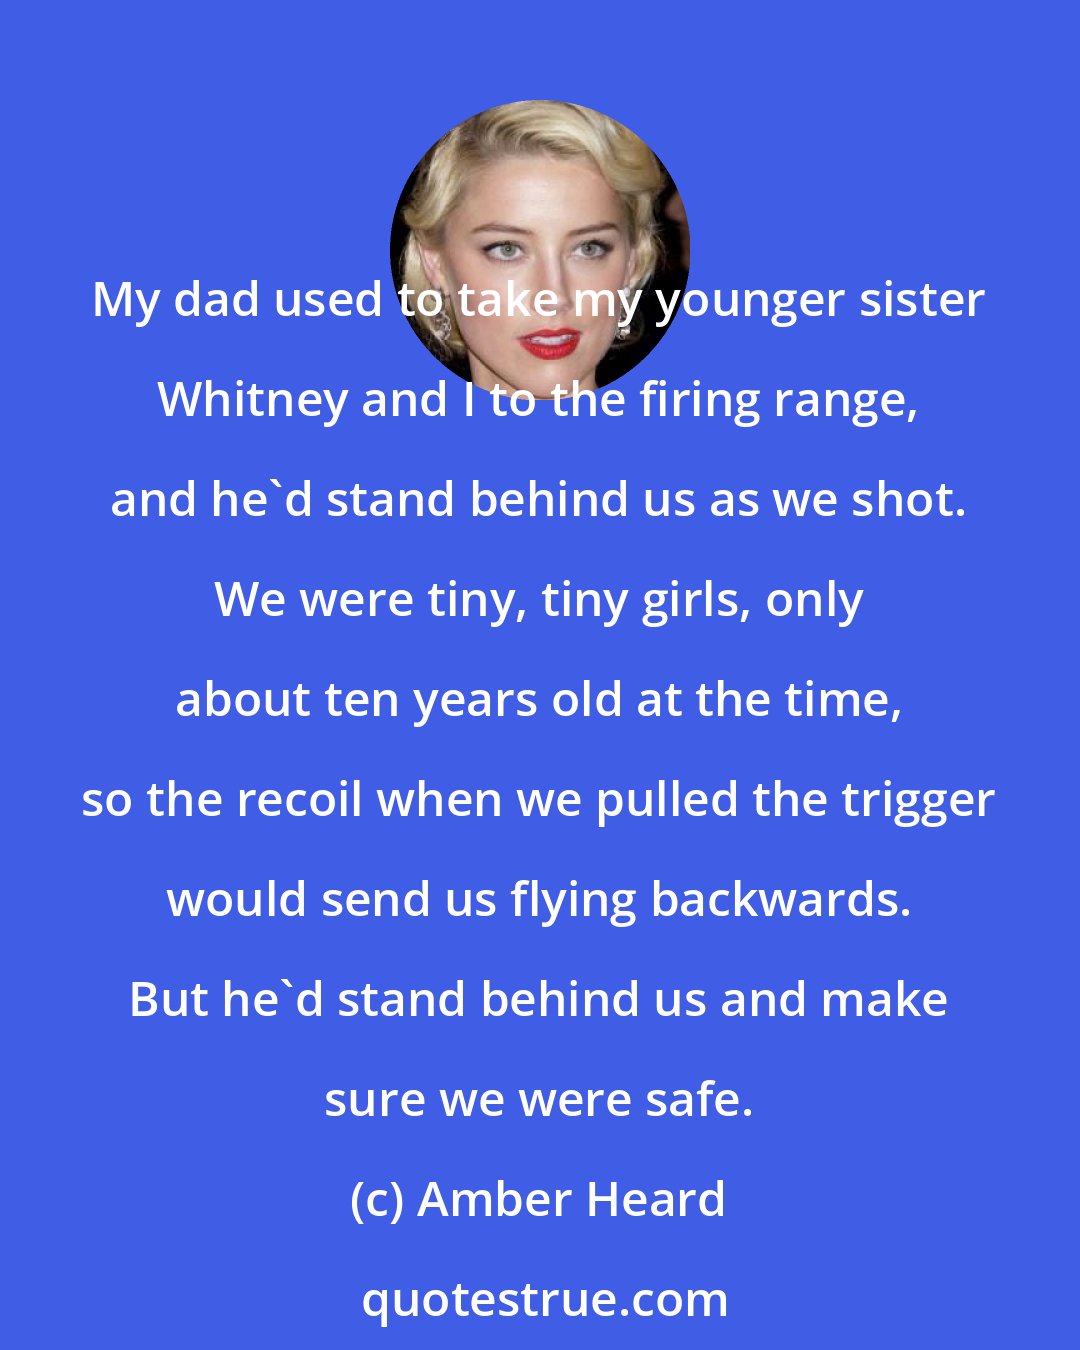 Amber Heard: My dad used to take my younger sister Whitney and I to the firing range, and he'd stand behind us as we shot. We were tiny, tiny girls, only about ten years old at the time, so the recoil when we pulled the trigger would send us flying backwards. But he'd stand behind us and make sure we were safe.